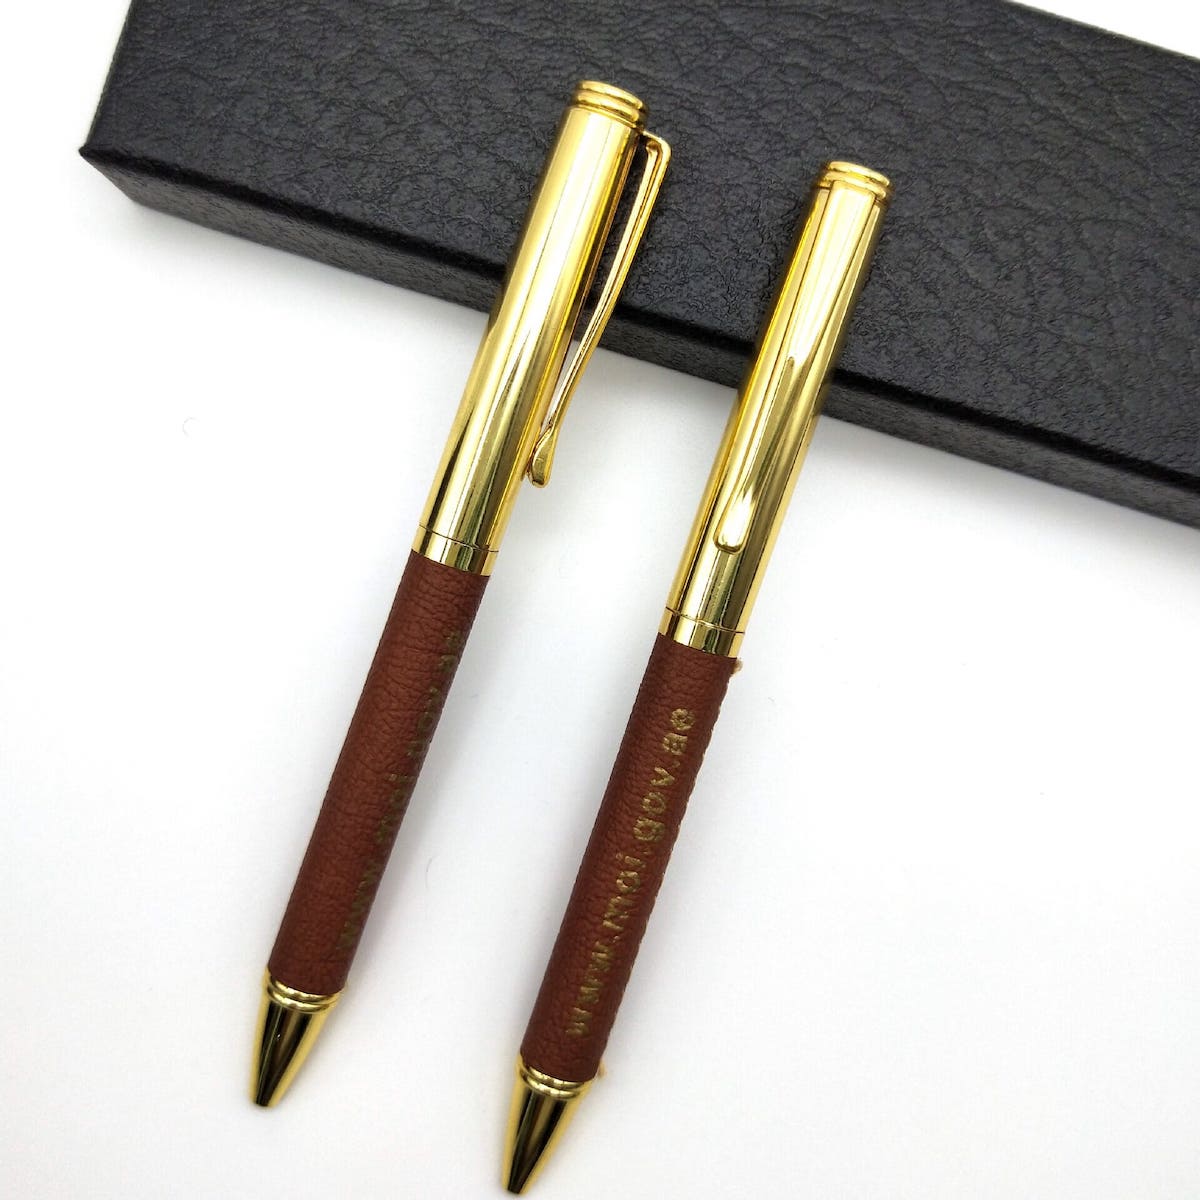 Luxury golden pen with leather